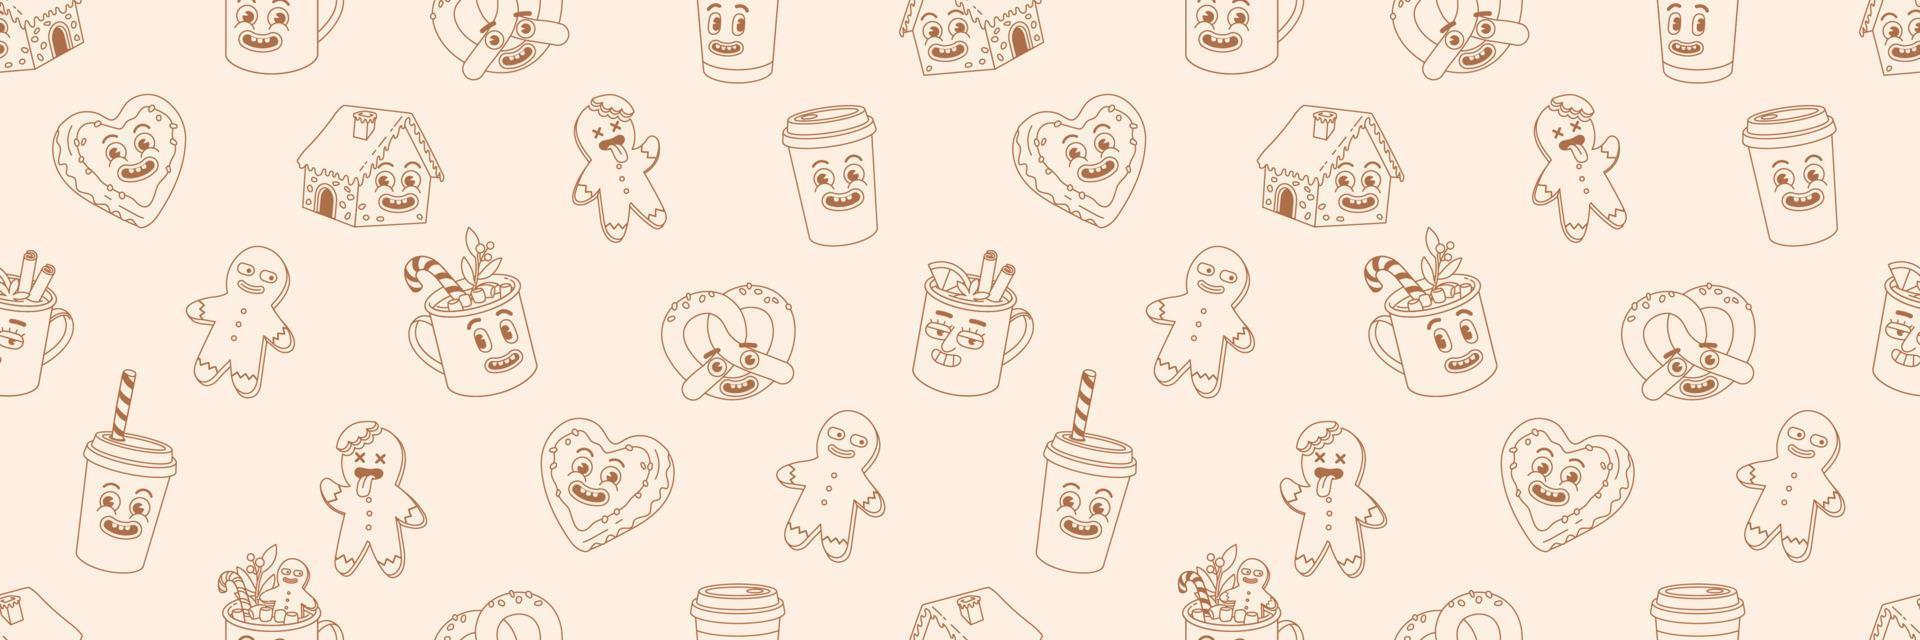 Christmas market street foods and drinks seamless pattern in trendy retro cartoon style. vector